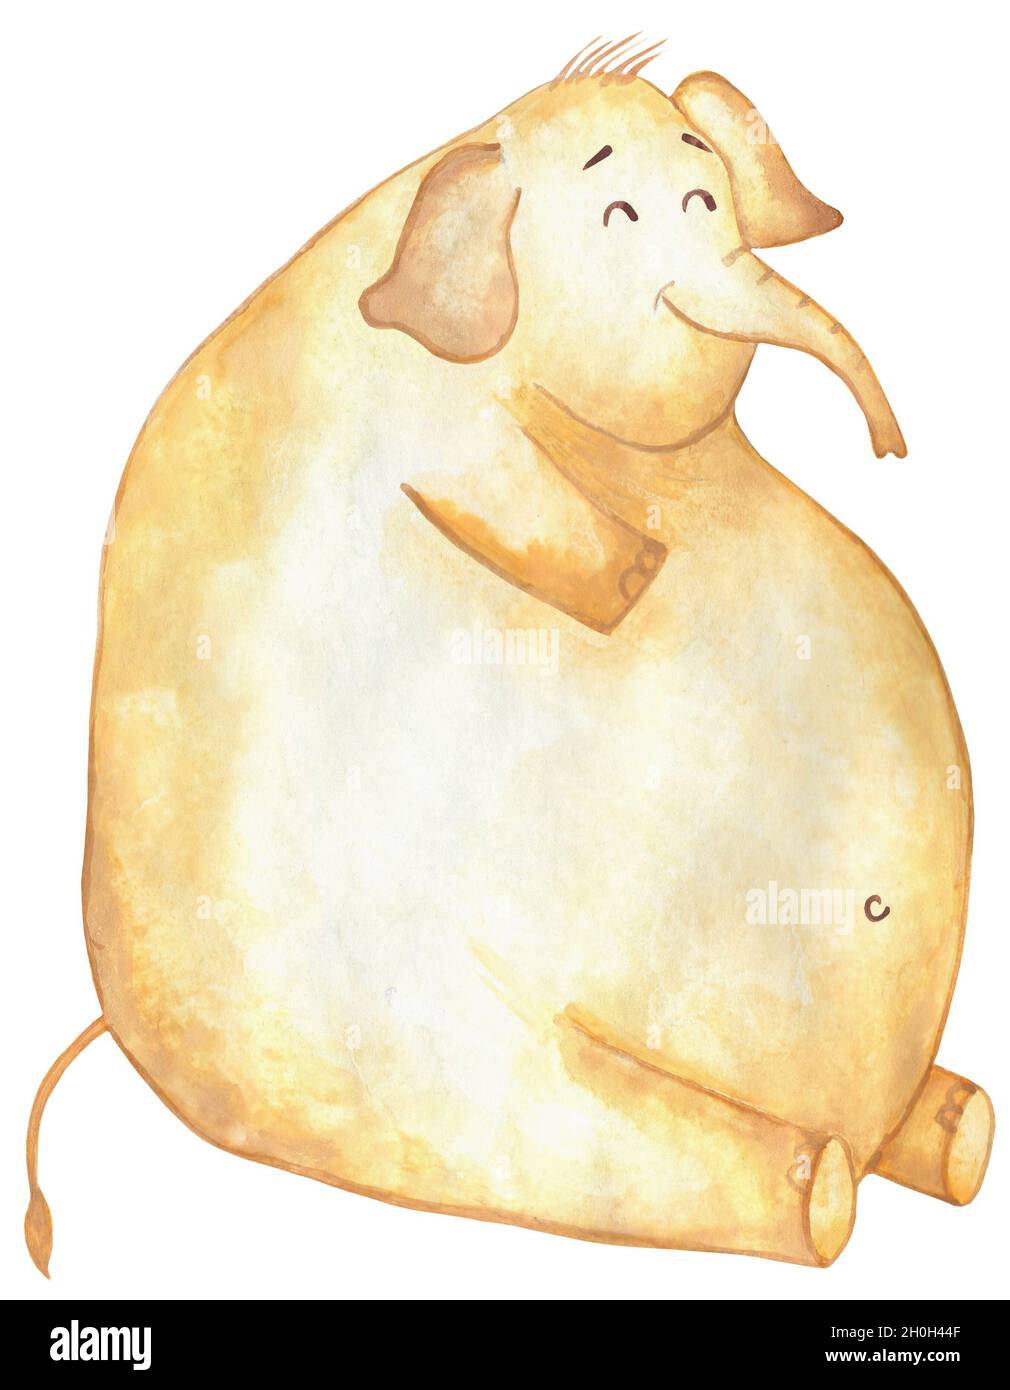 A huge fat yellow elephant sits and smiles. Isolated on a white background. Comic elephant. Drawn by hand. Stock Photo